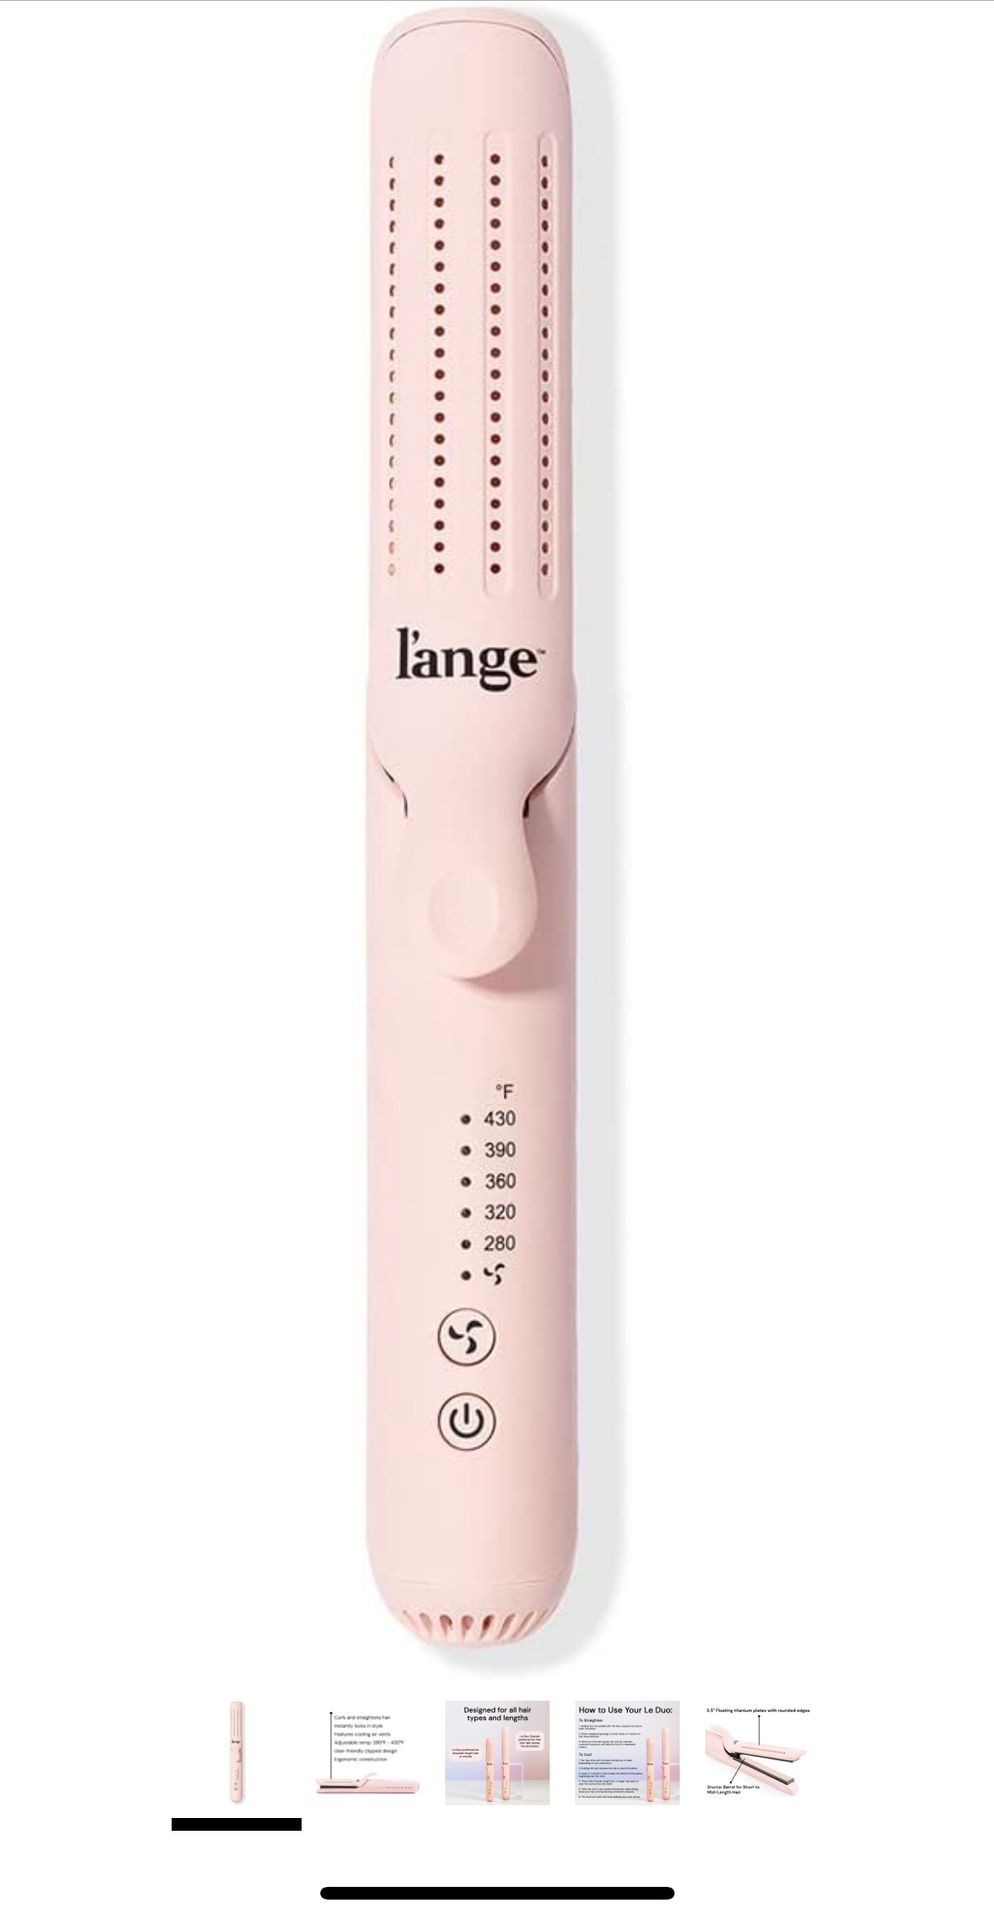 L’ange hair Le Duo 360 Air Styler 2-in-1 Curling Want And Titanium Straightener